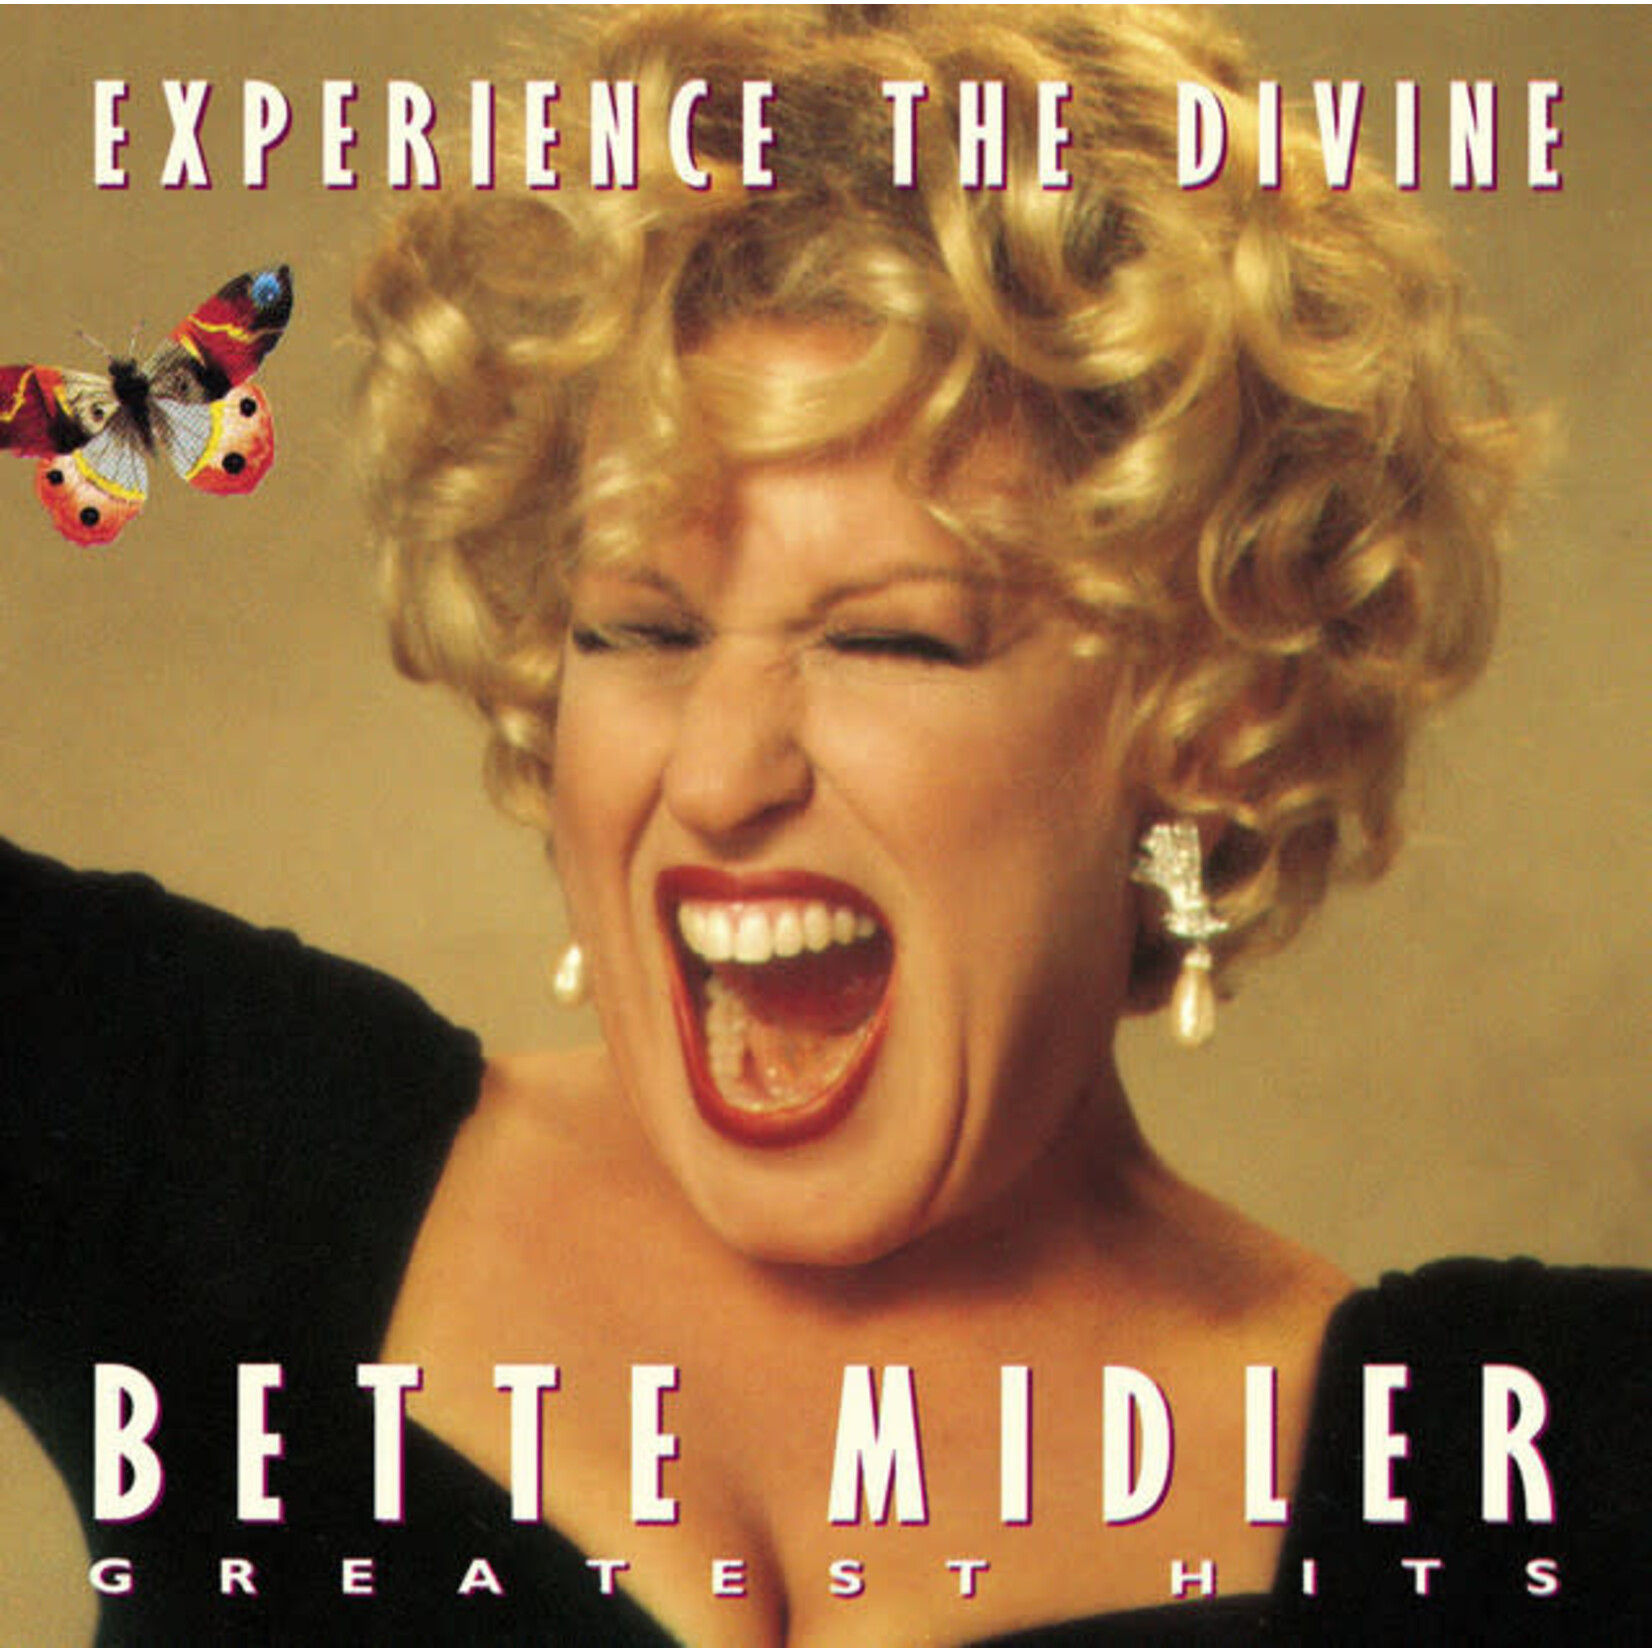 Bette Midler - Experience The Divine: Bette Midler Greatest Hits [USED CD]